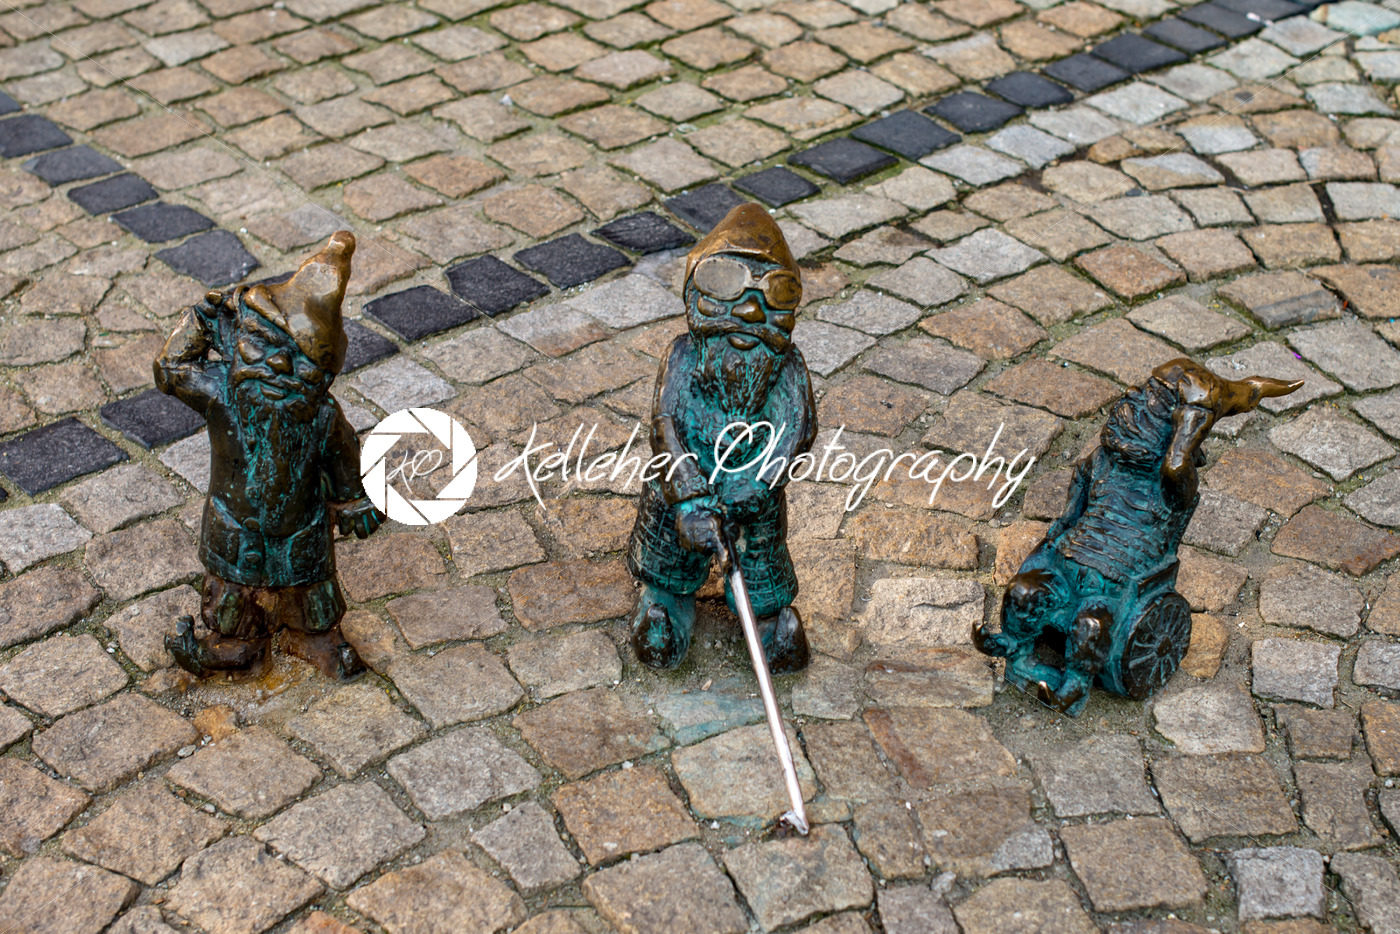 Wroclaw, Poland – March 4, 2018: Wroclaw, a miniature statue of a gnome on the main square of the city. - Kelleher Photography Store